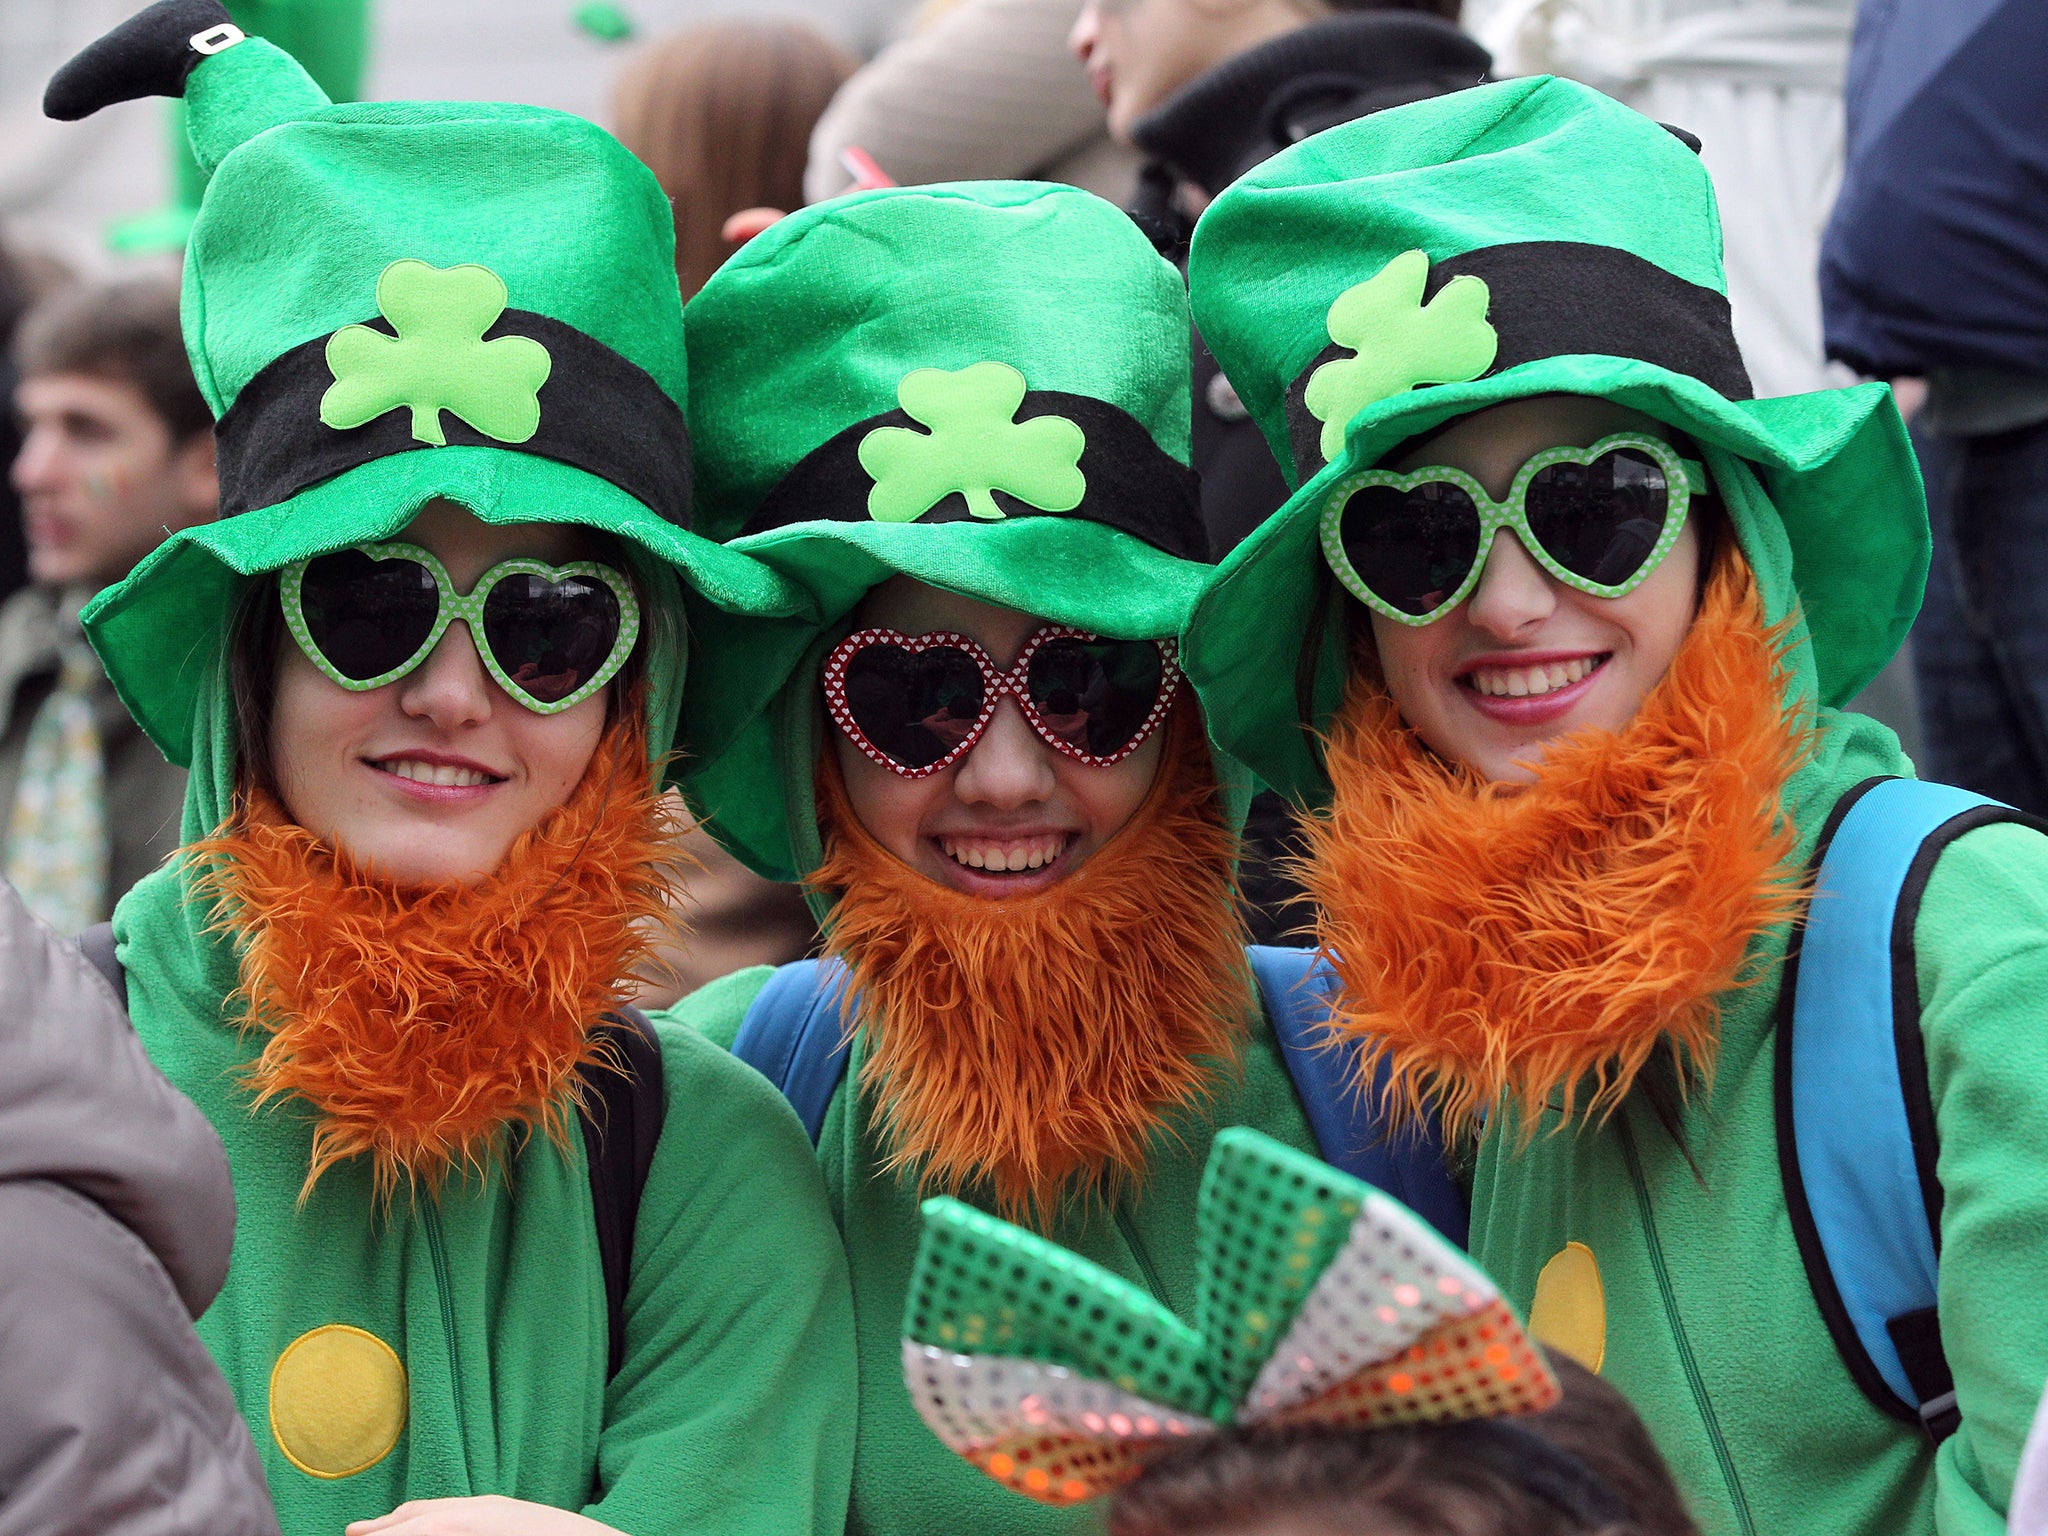 Only 10 per cent of Irish people are redheads